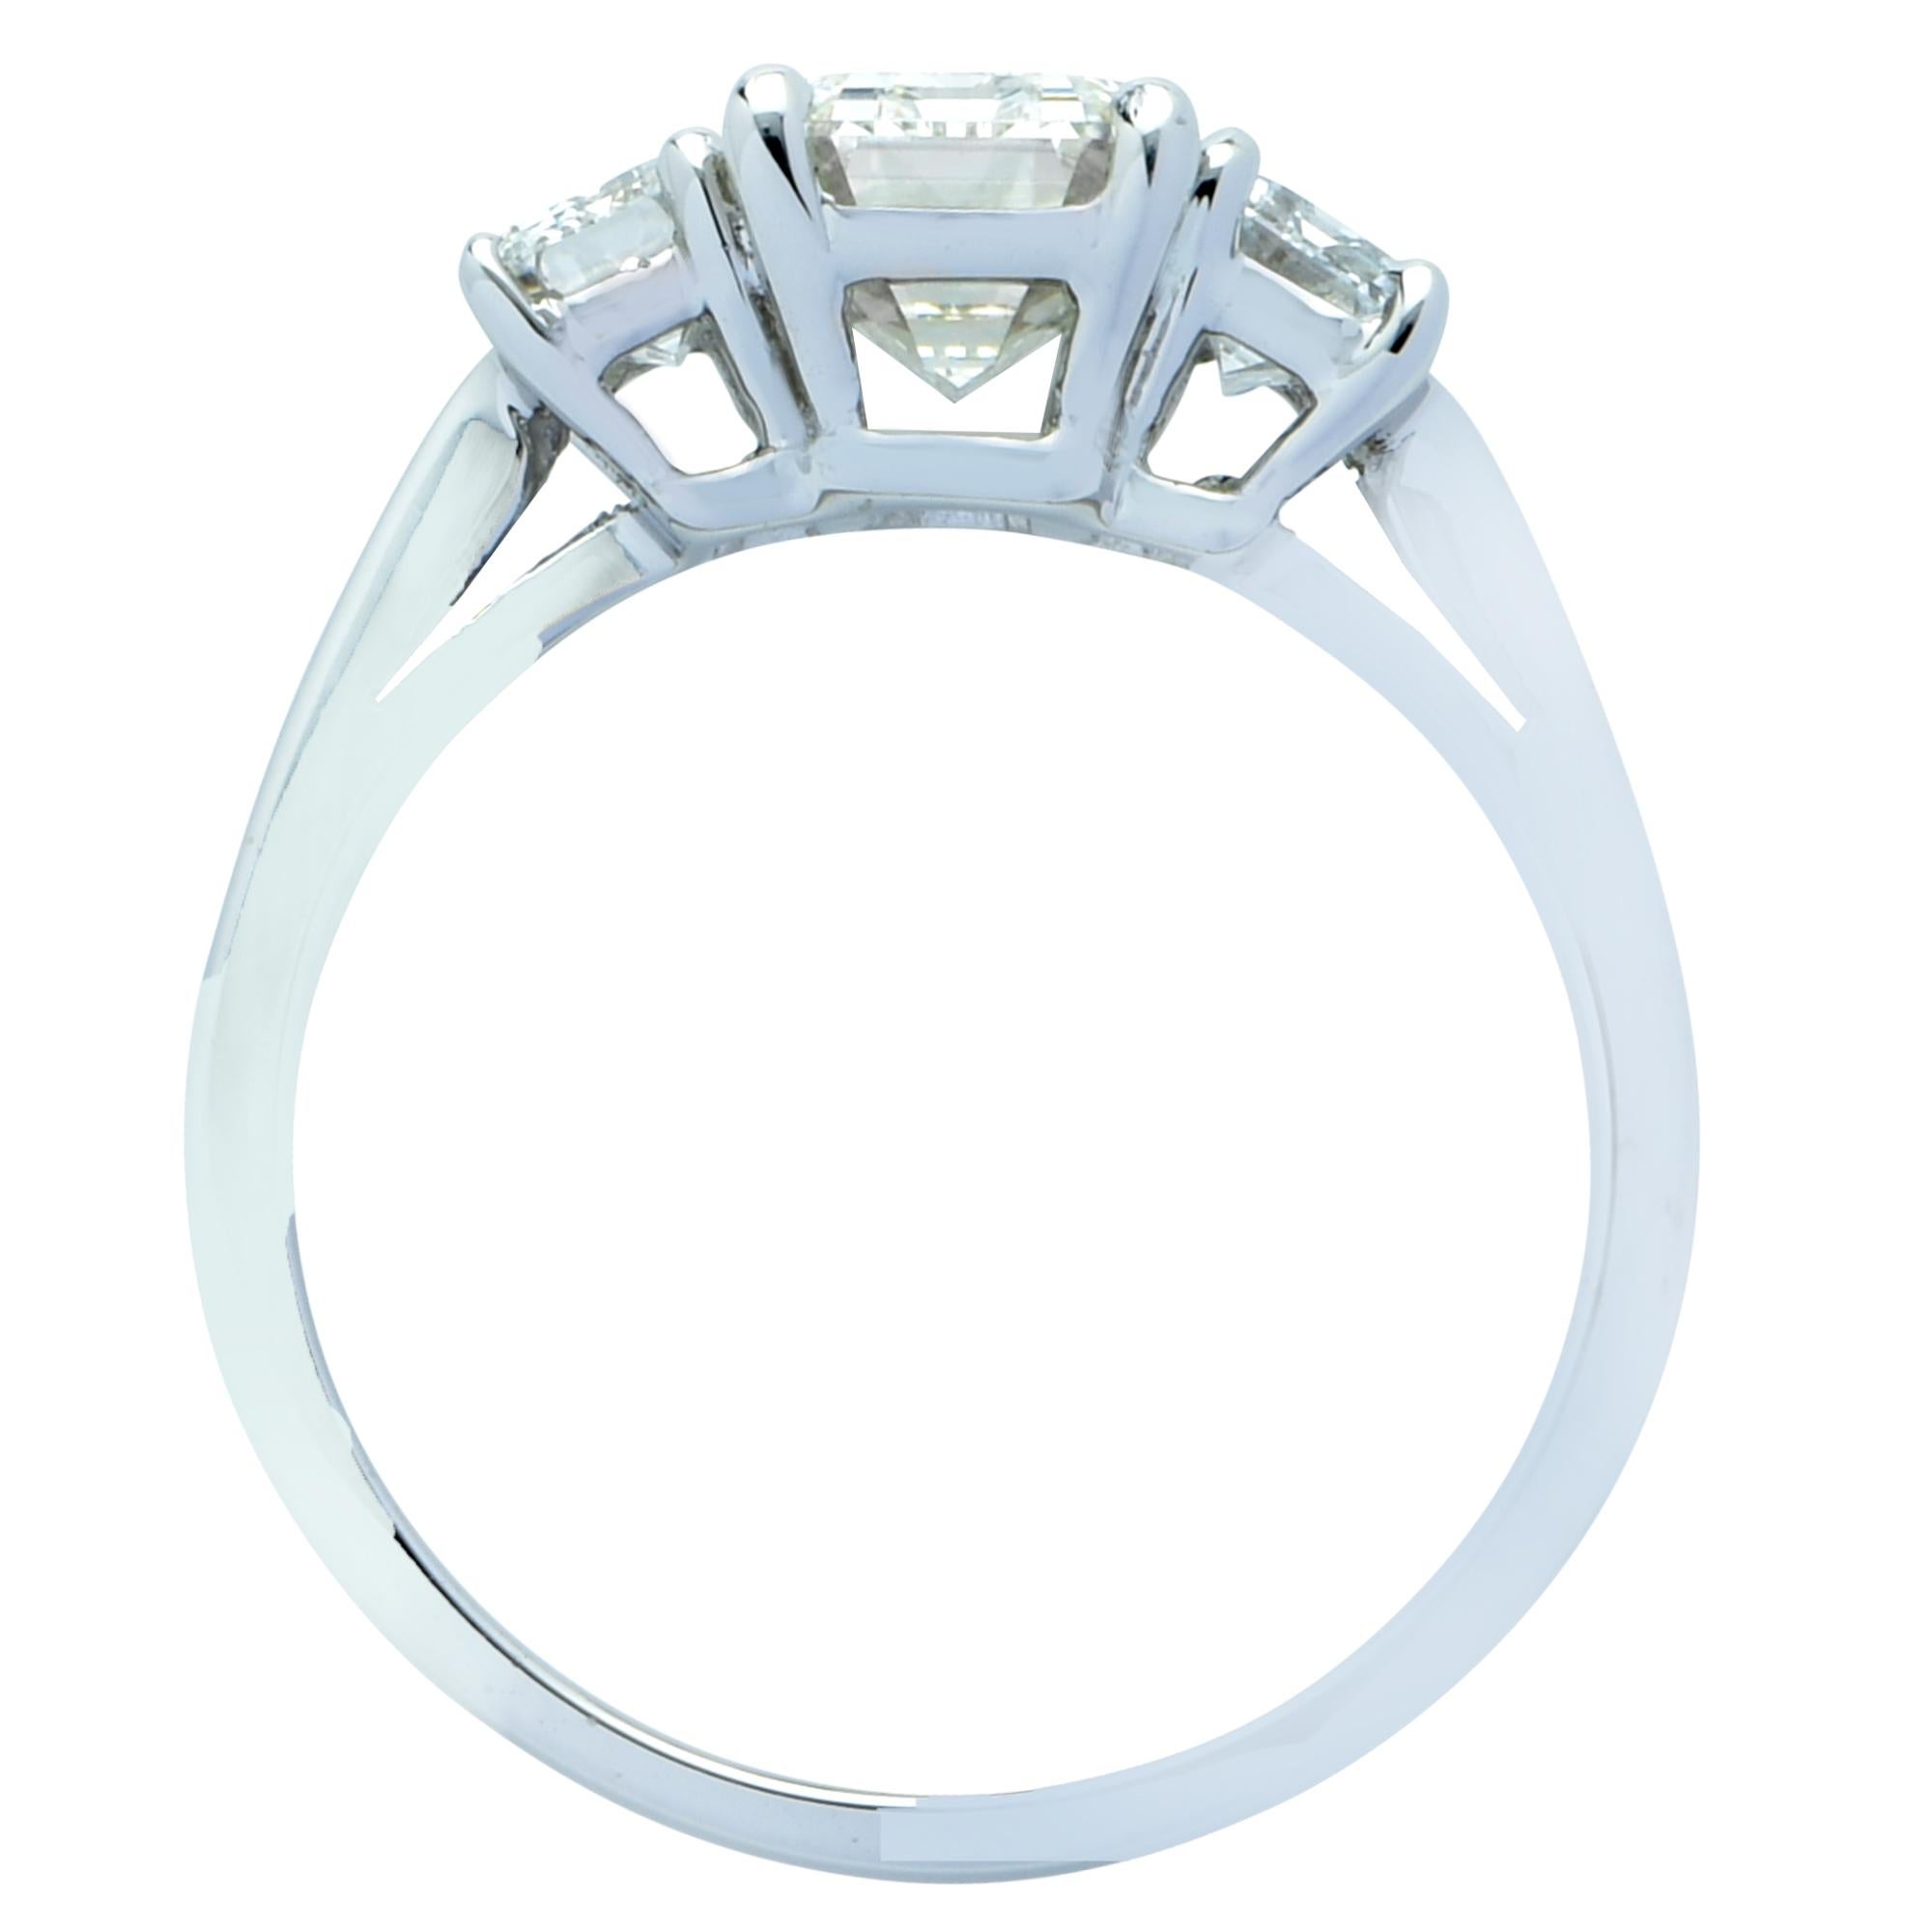 Exquisite engagement ring crafted in platinum, showcasing a gorgeous emerald cut diamond weighing 1.79 carats, K color, VS1 clarity, adorned with two emerald cut diamonds weighing .82 carats total, J color, VS2 clarity. The seamless face of this